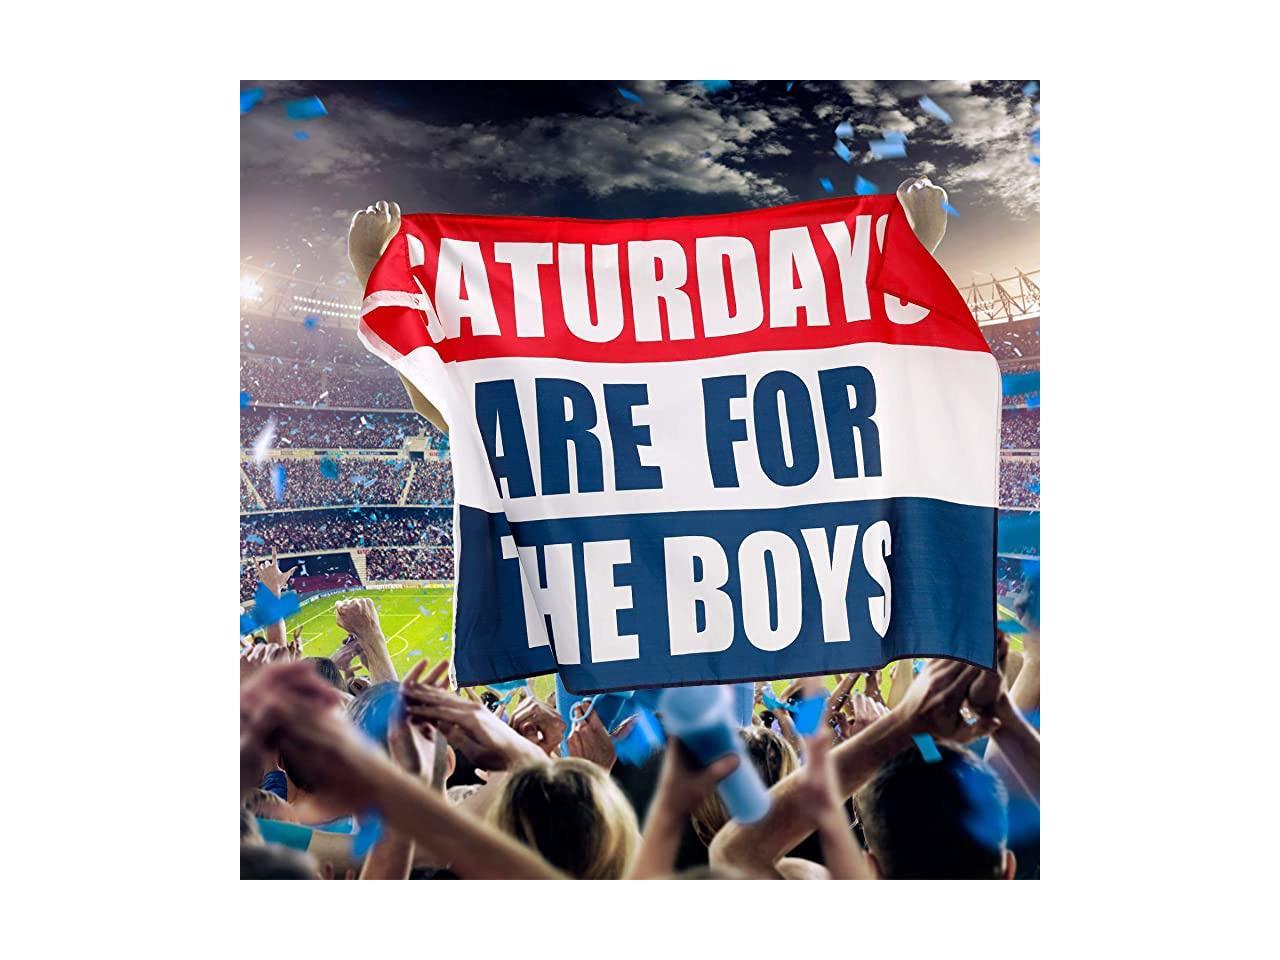 Saturday are Flag for The Boys Flags 3x5 Feet Outdoor Indoor Dorm Room Decoration Banner for College Football Fraternities Party Gdraco Saturdays Flag 